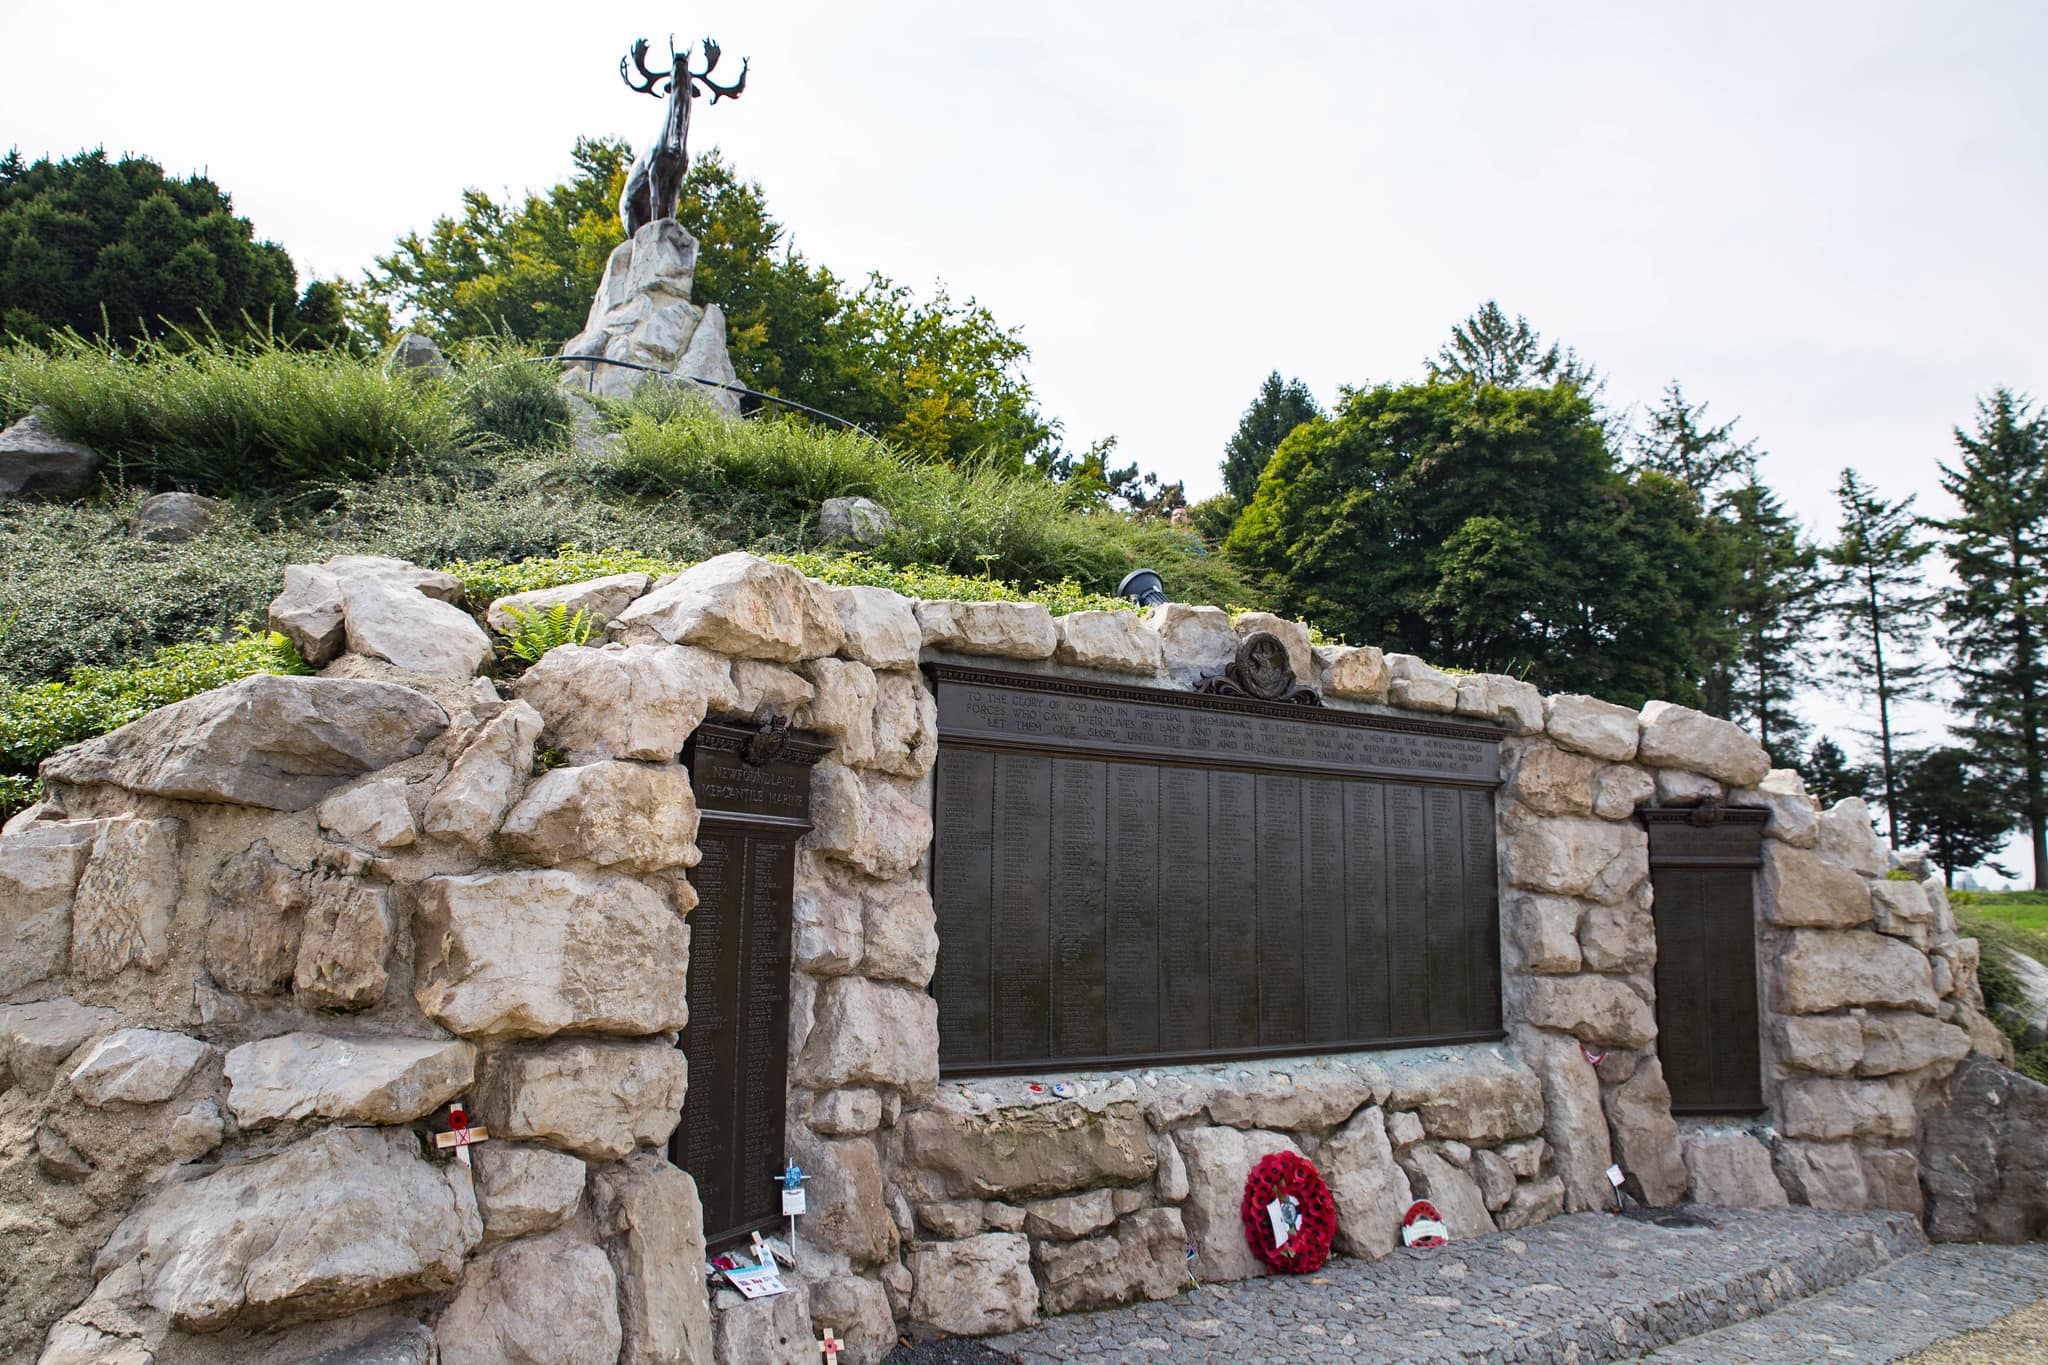 The Newfoundland memorial at Beaumont Hamel: a green hill, hundreds of names engraved in metal, and a statue of a caribou.